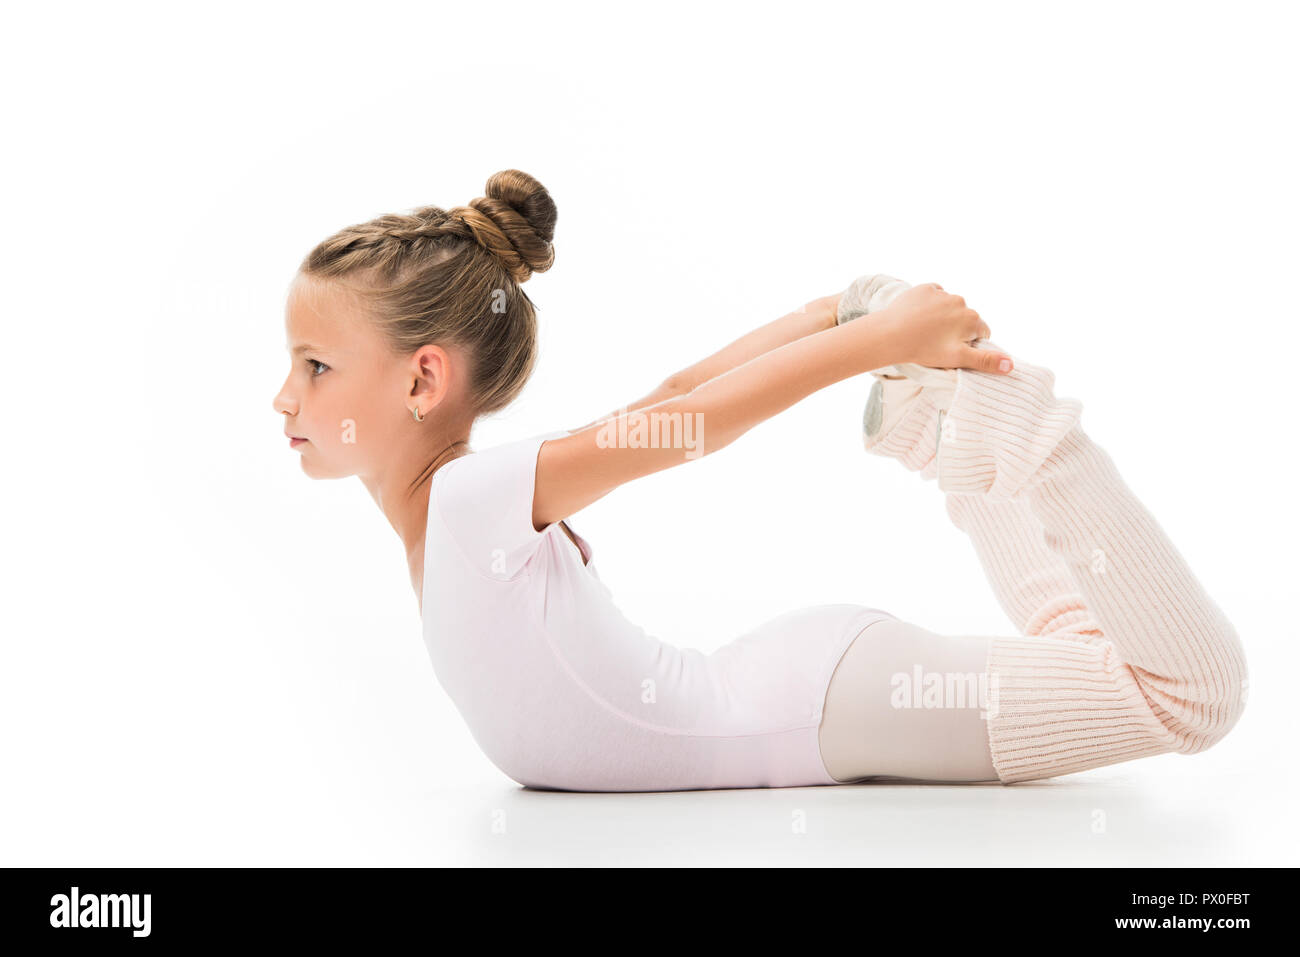 side view of focused little ballerina stretching isolated on white background Stock Photo